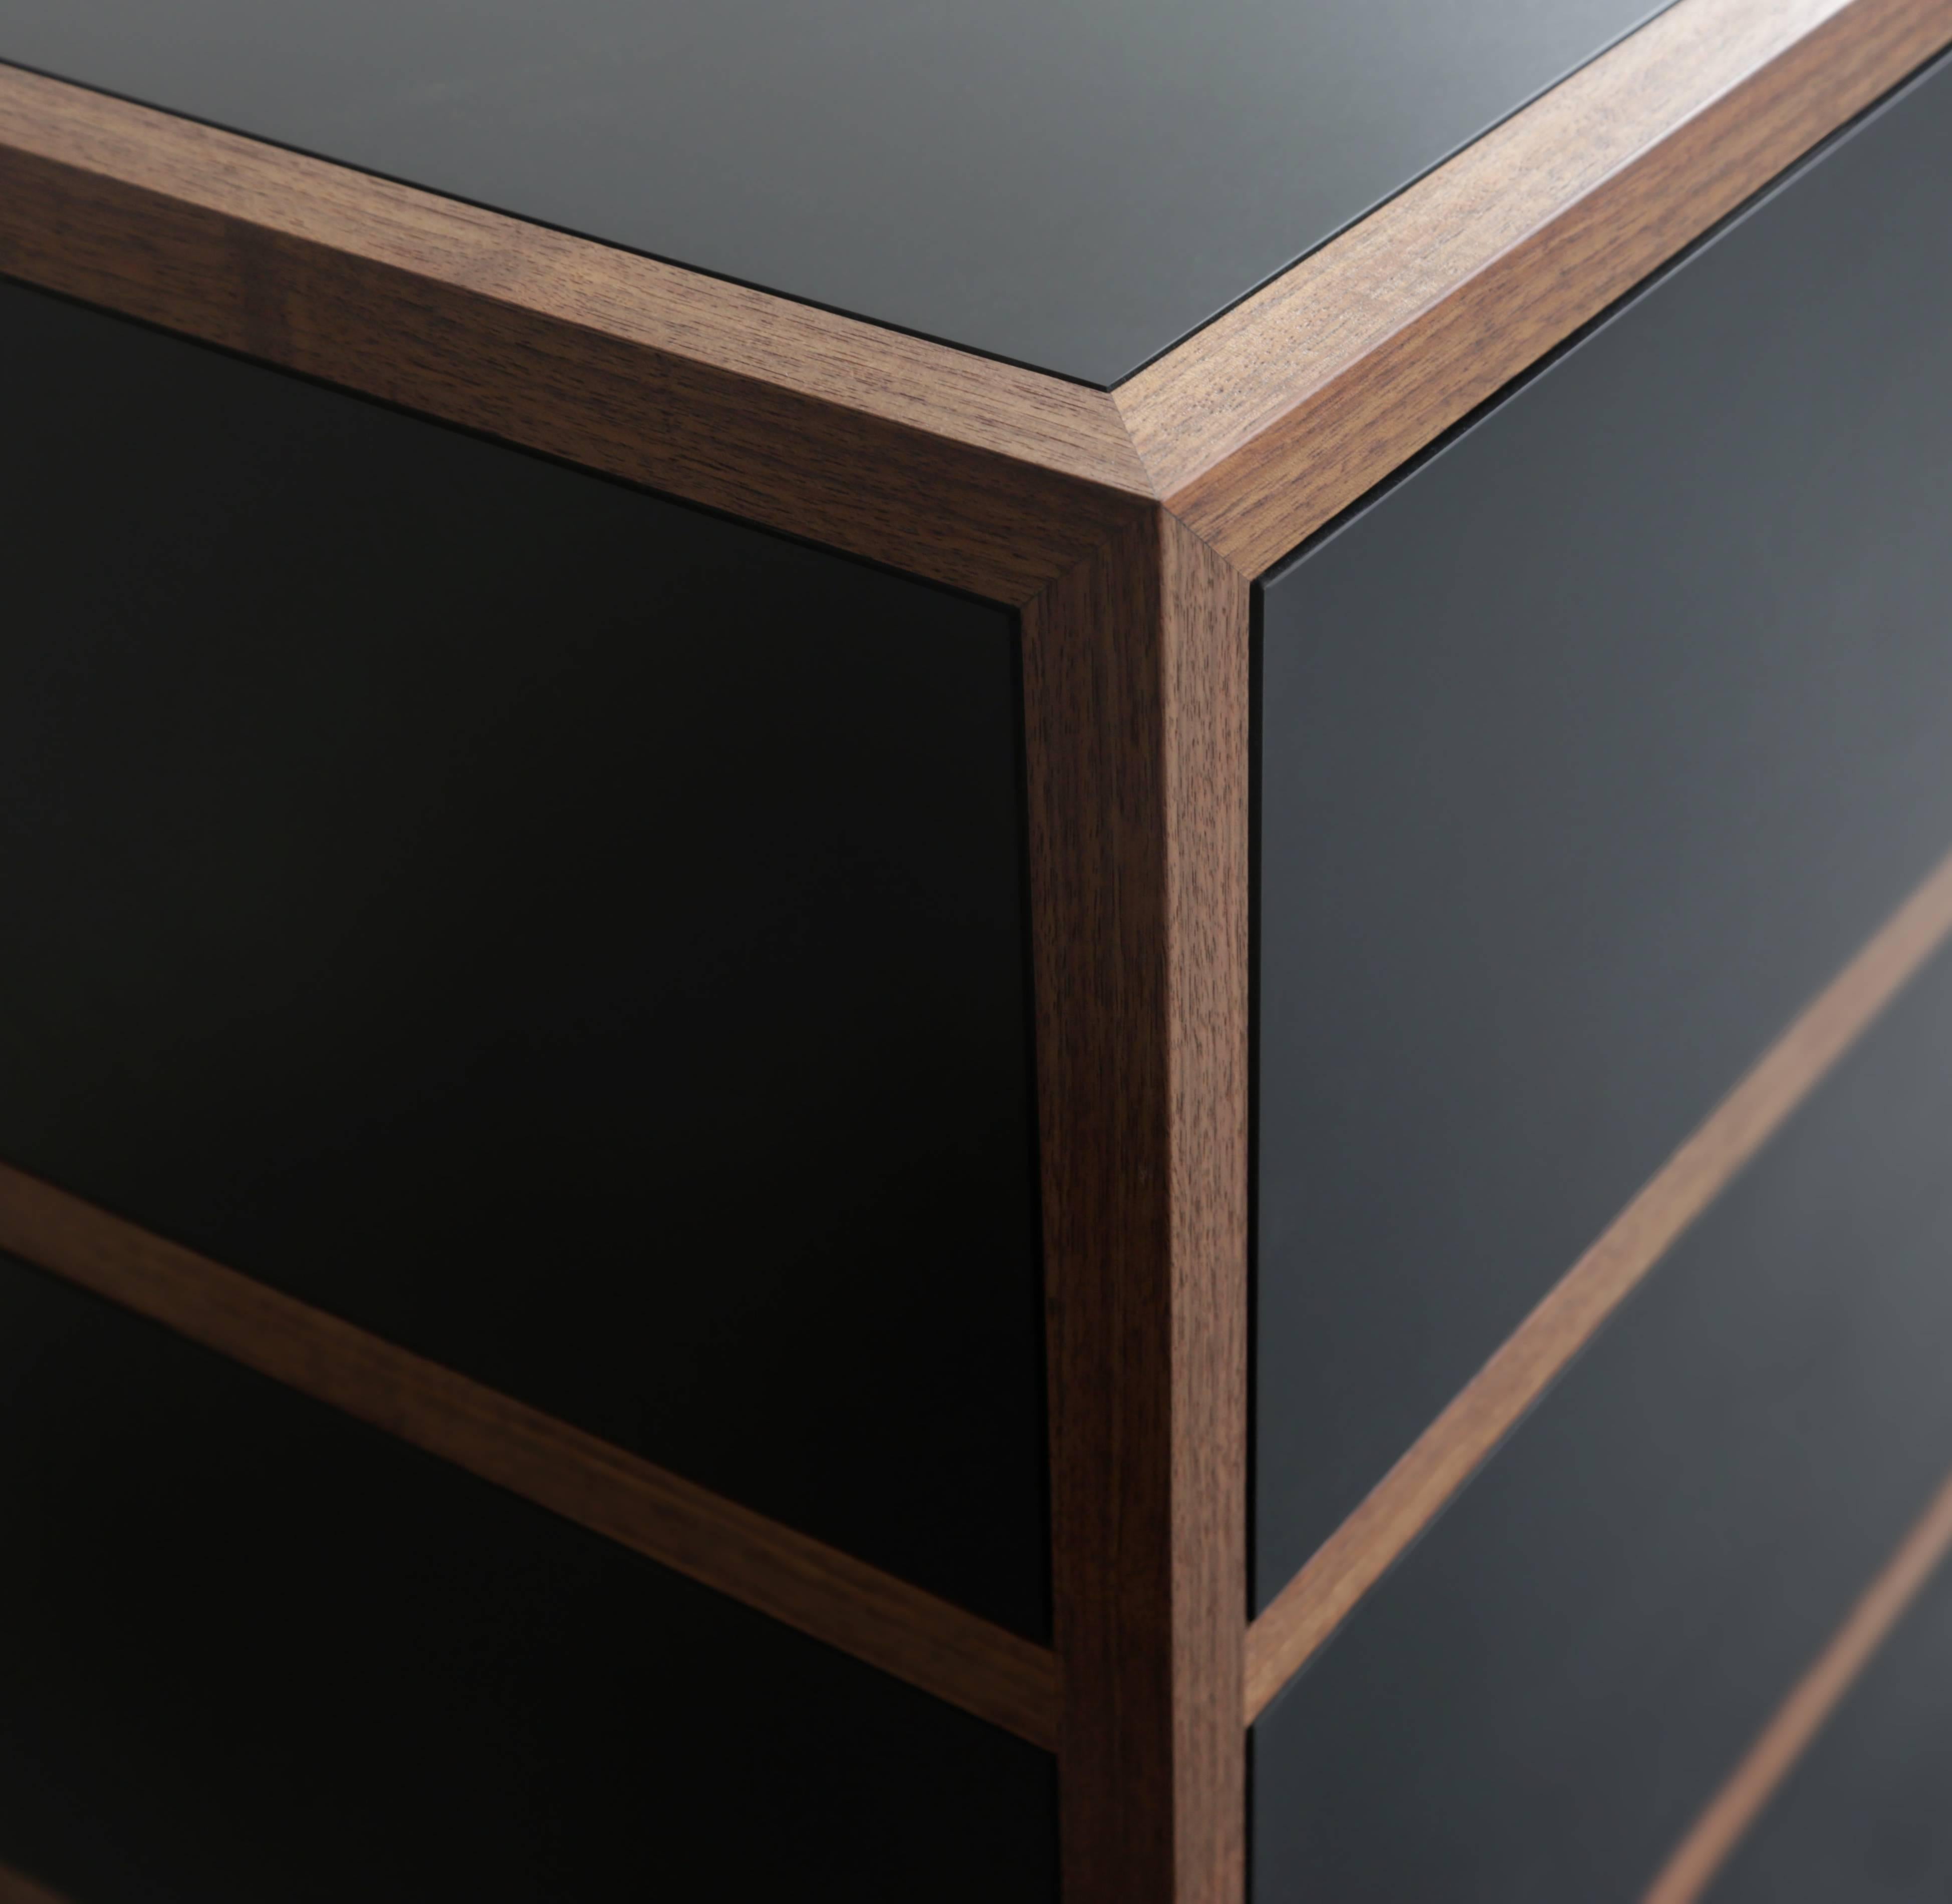 Streamlined dresser with touch-opening drawers . Paper composite and American walnut exterior
American walnut interior triple miter joinery sandblasted blackened steel base FSC certified recycled paper.